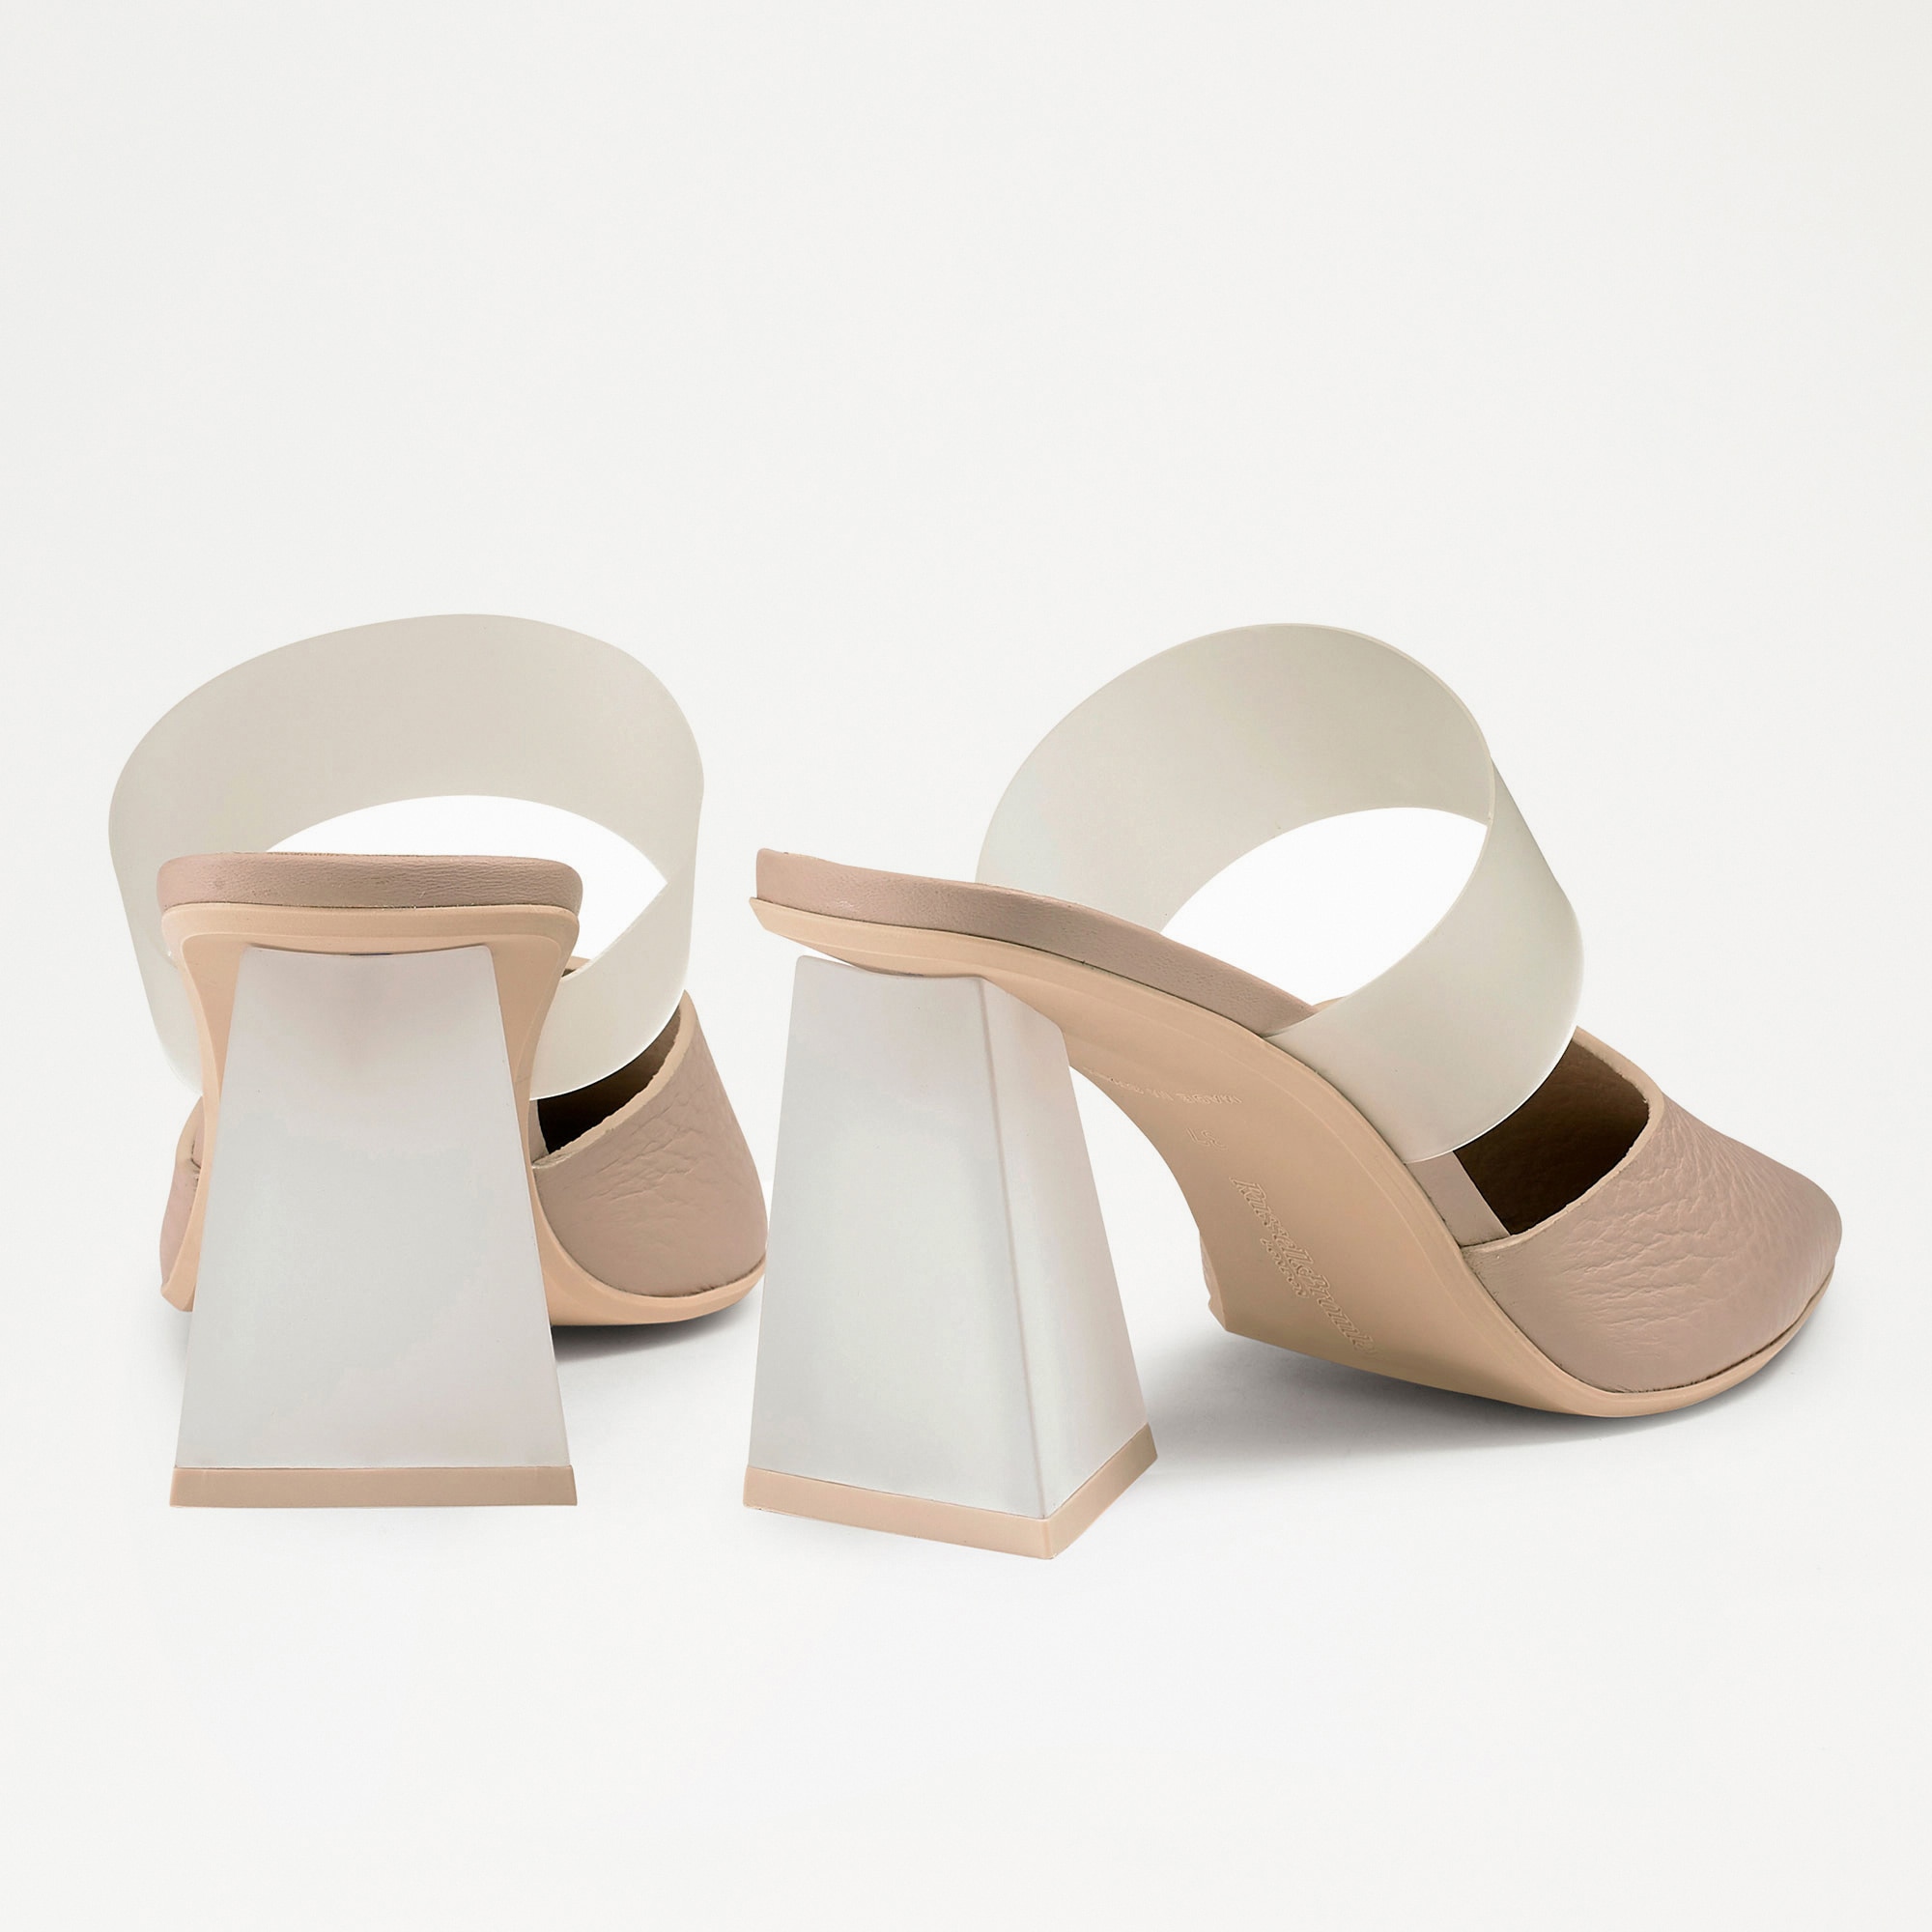 VISION Frosted Pump in Neutral Grained Leather | Russell & Bromley